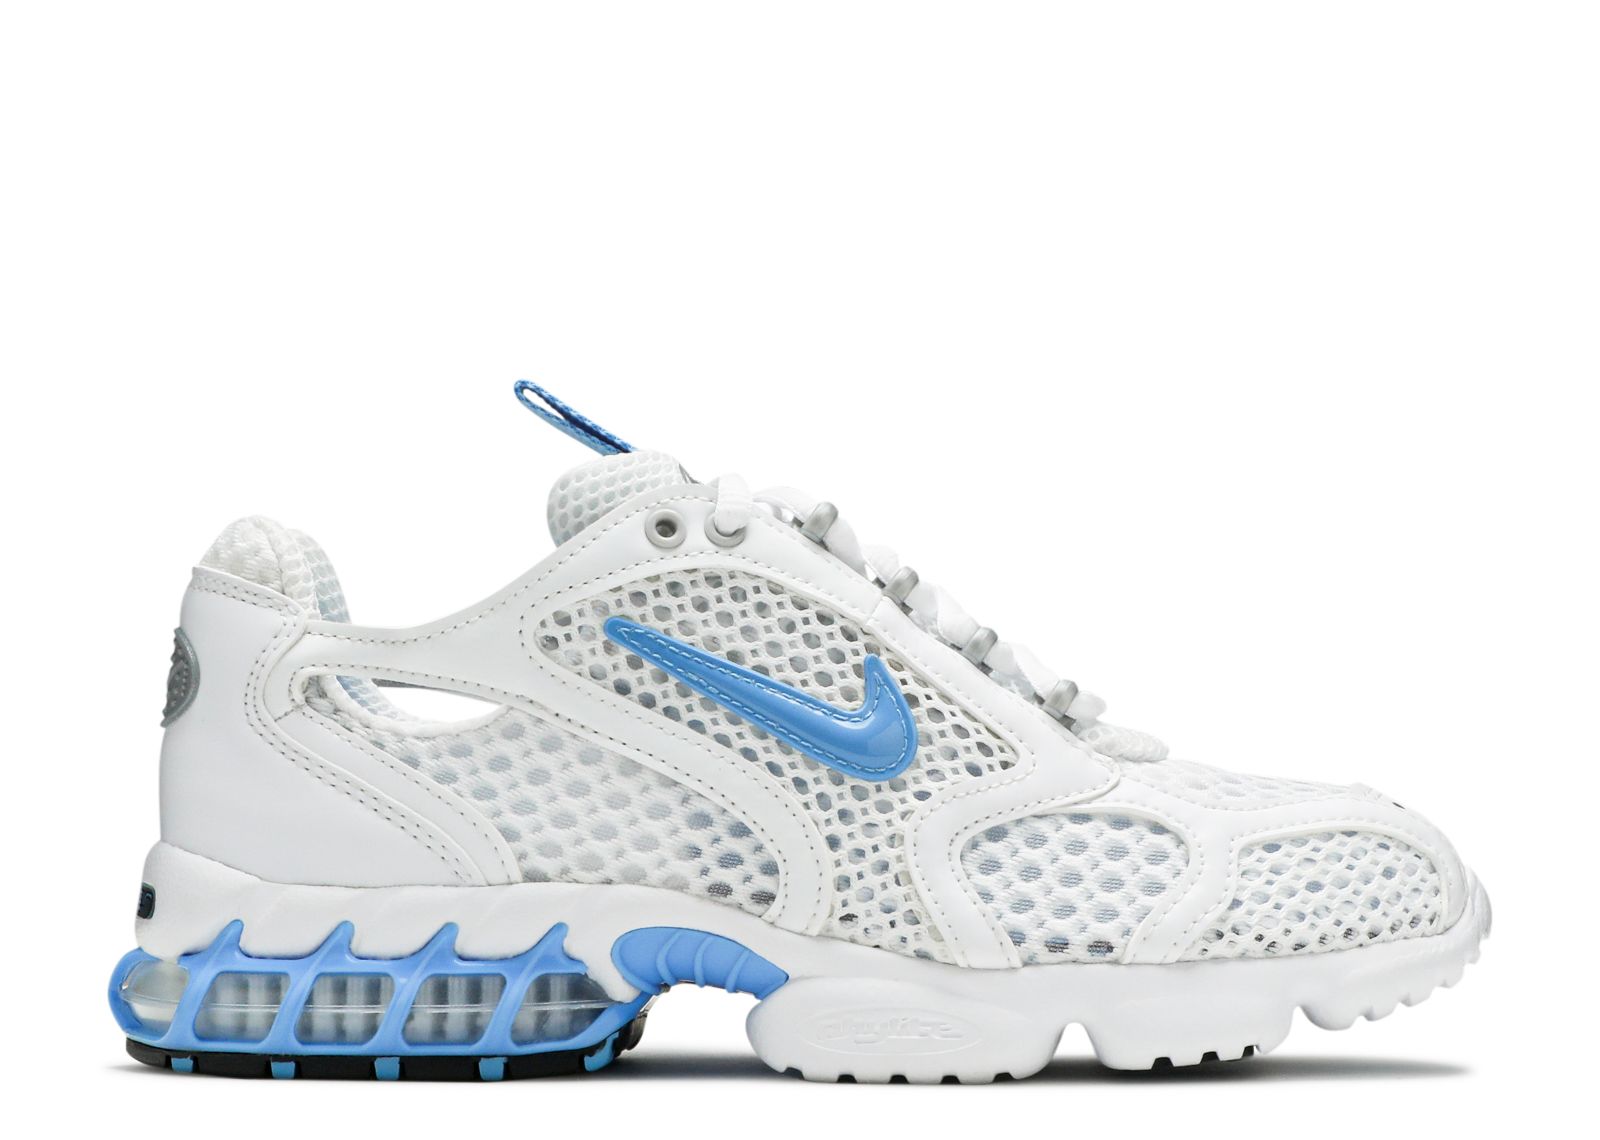 Кроссовки Nike Wmns Air Zoom Spiridon Cage 2 'White University Blue', белый stussy x nike air zoom spiridon cage 2 men women running shoes breathable outdoor sports sneakers mens trianers eur 36 45